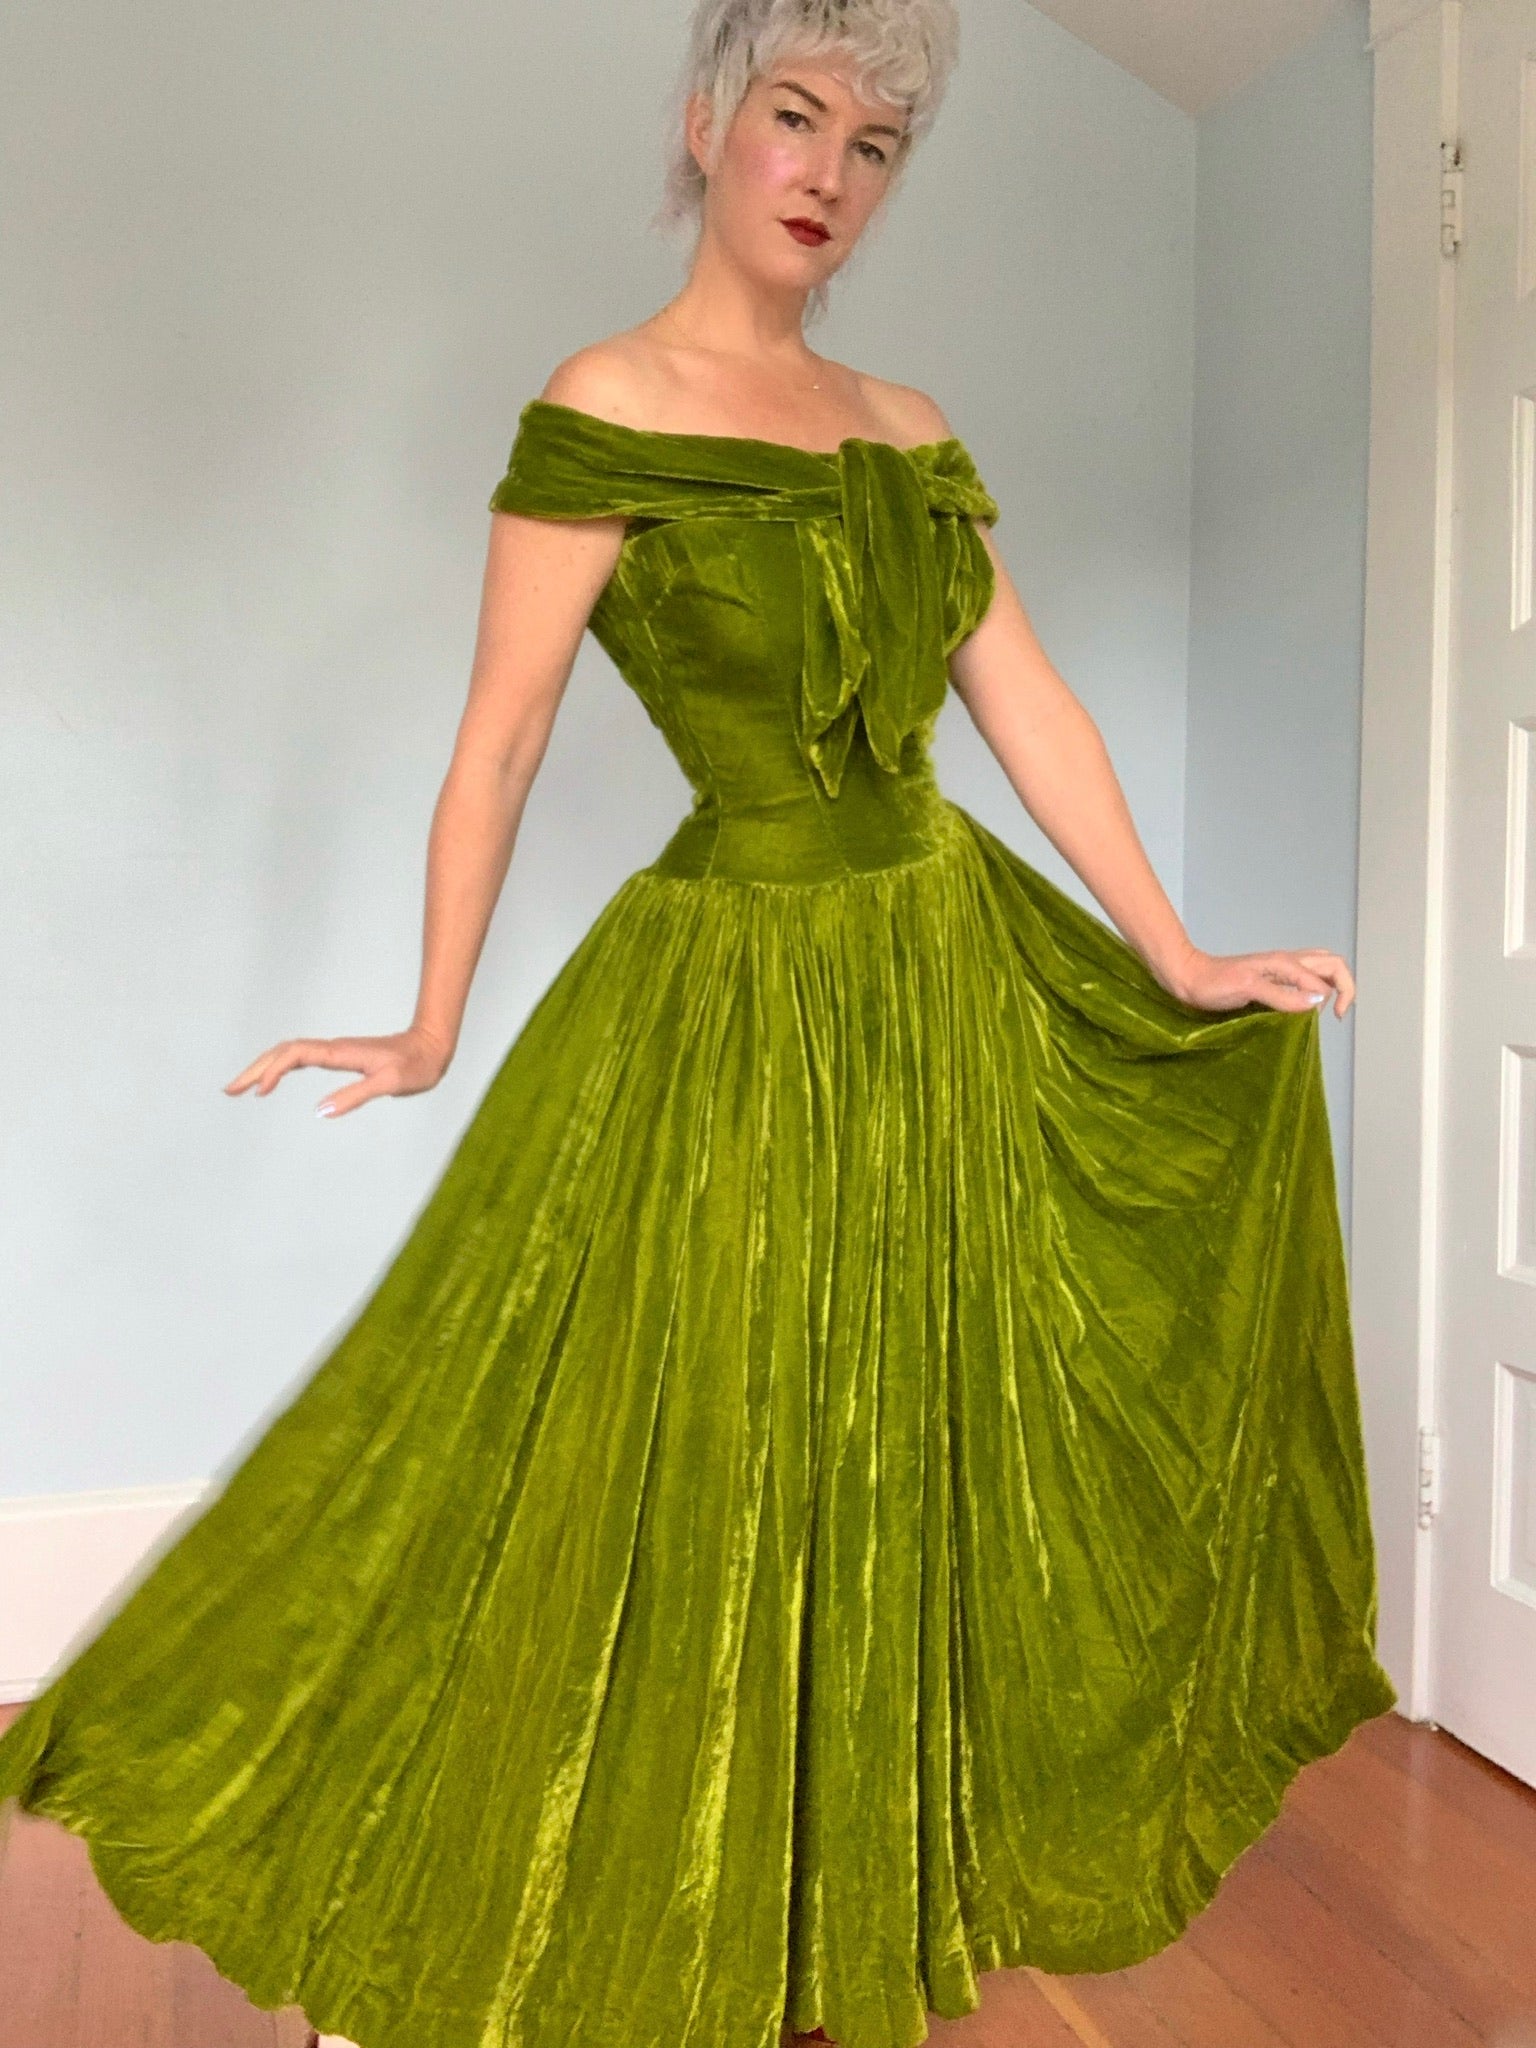 Chartreuse Rayon Velvet 1940s Gown